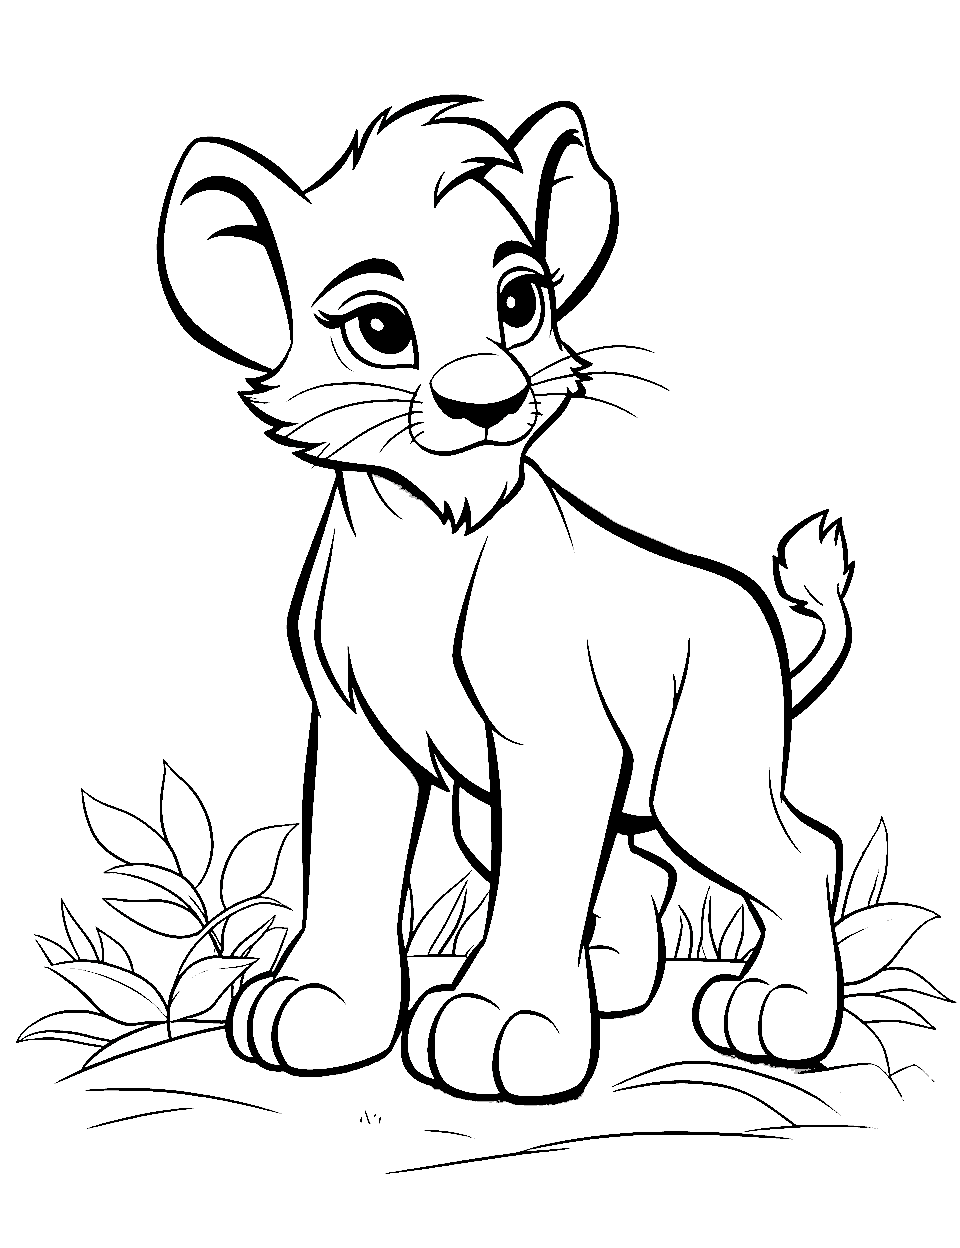 Simba's Adventure Coloring Page - Young Simba exploring the Pride Lands with curiosity.